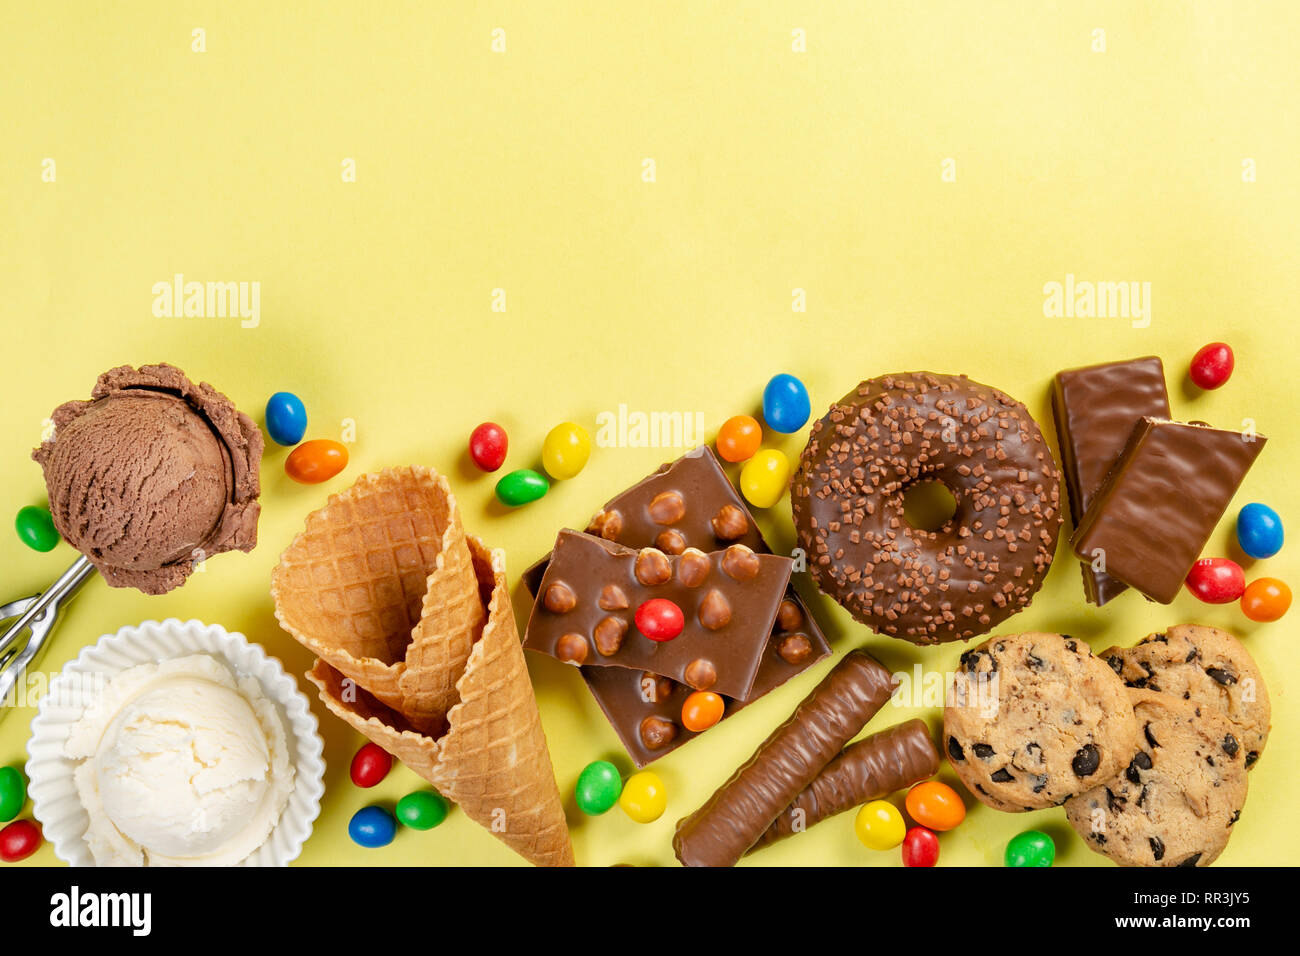 Selection of colorful sweets - chocolate, donuts, cookies, lollipops, ice cream Stock Photo